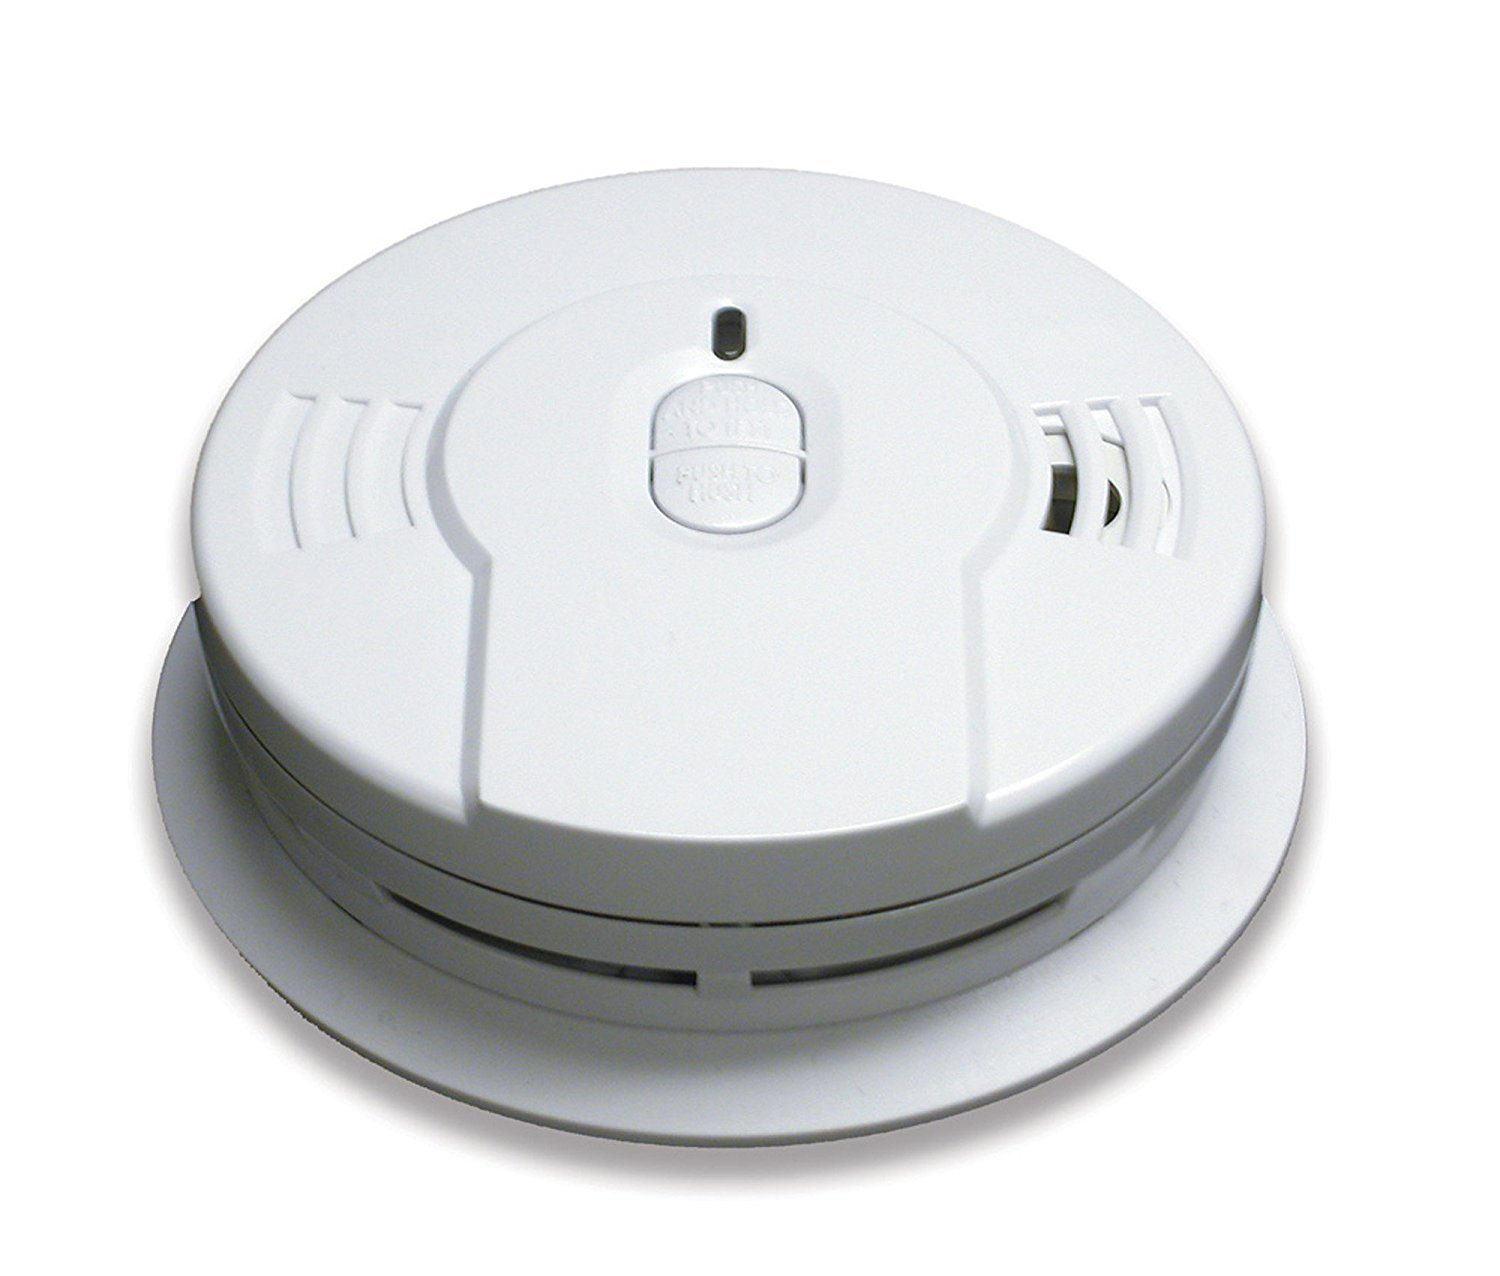 Residential Smart Smoke Detectors Market 2017-2021: Top Manufactures, Market Size, Applications and Future Prospects